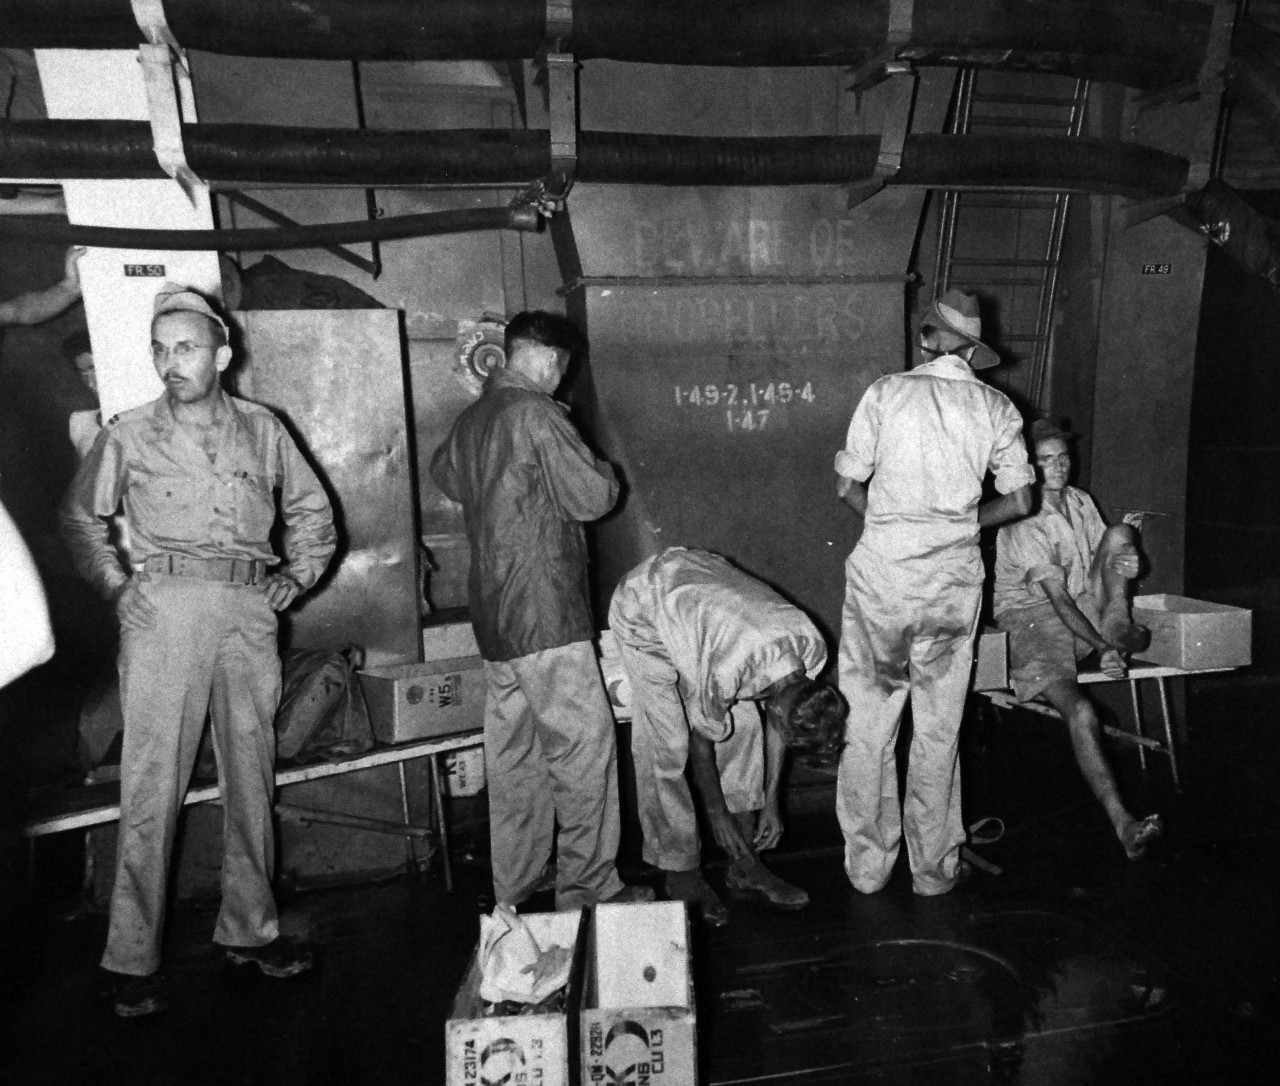 80-G-343554:    Allied Prisoner of War, Formosa, 1945.  Liberated British Officers from a Formosan prison camp try out new clothes on board USS Block Island (CVE 106) after three years confinement.   Photographed by Photographer’s Mate First Class T.K. Brett, September 5, 1945.   Official U.S. Navy photograph, now in the collection of the National Archives.  (5/22/2014).   